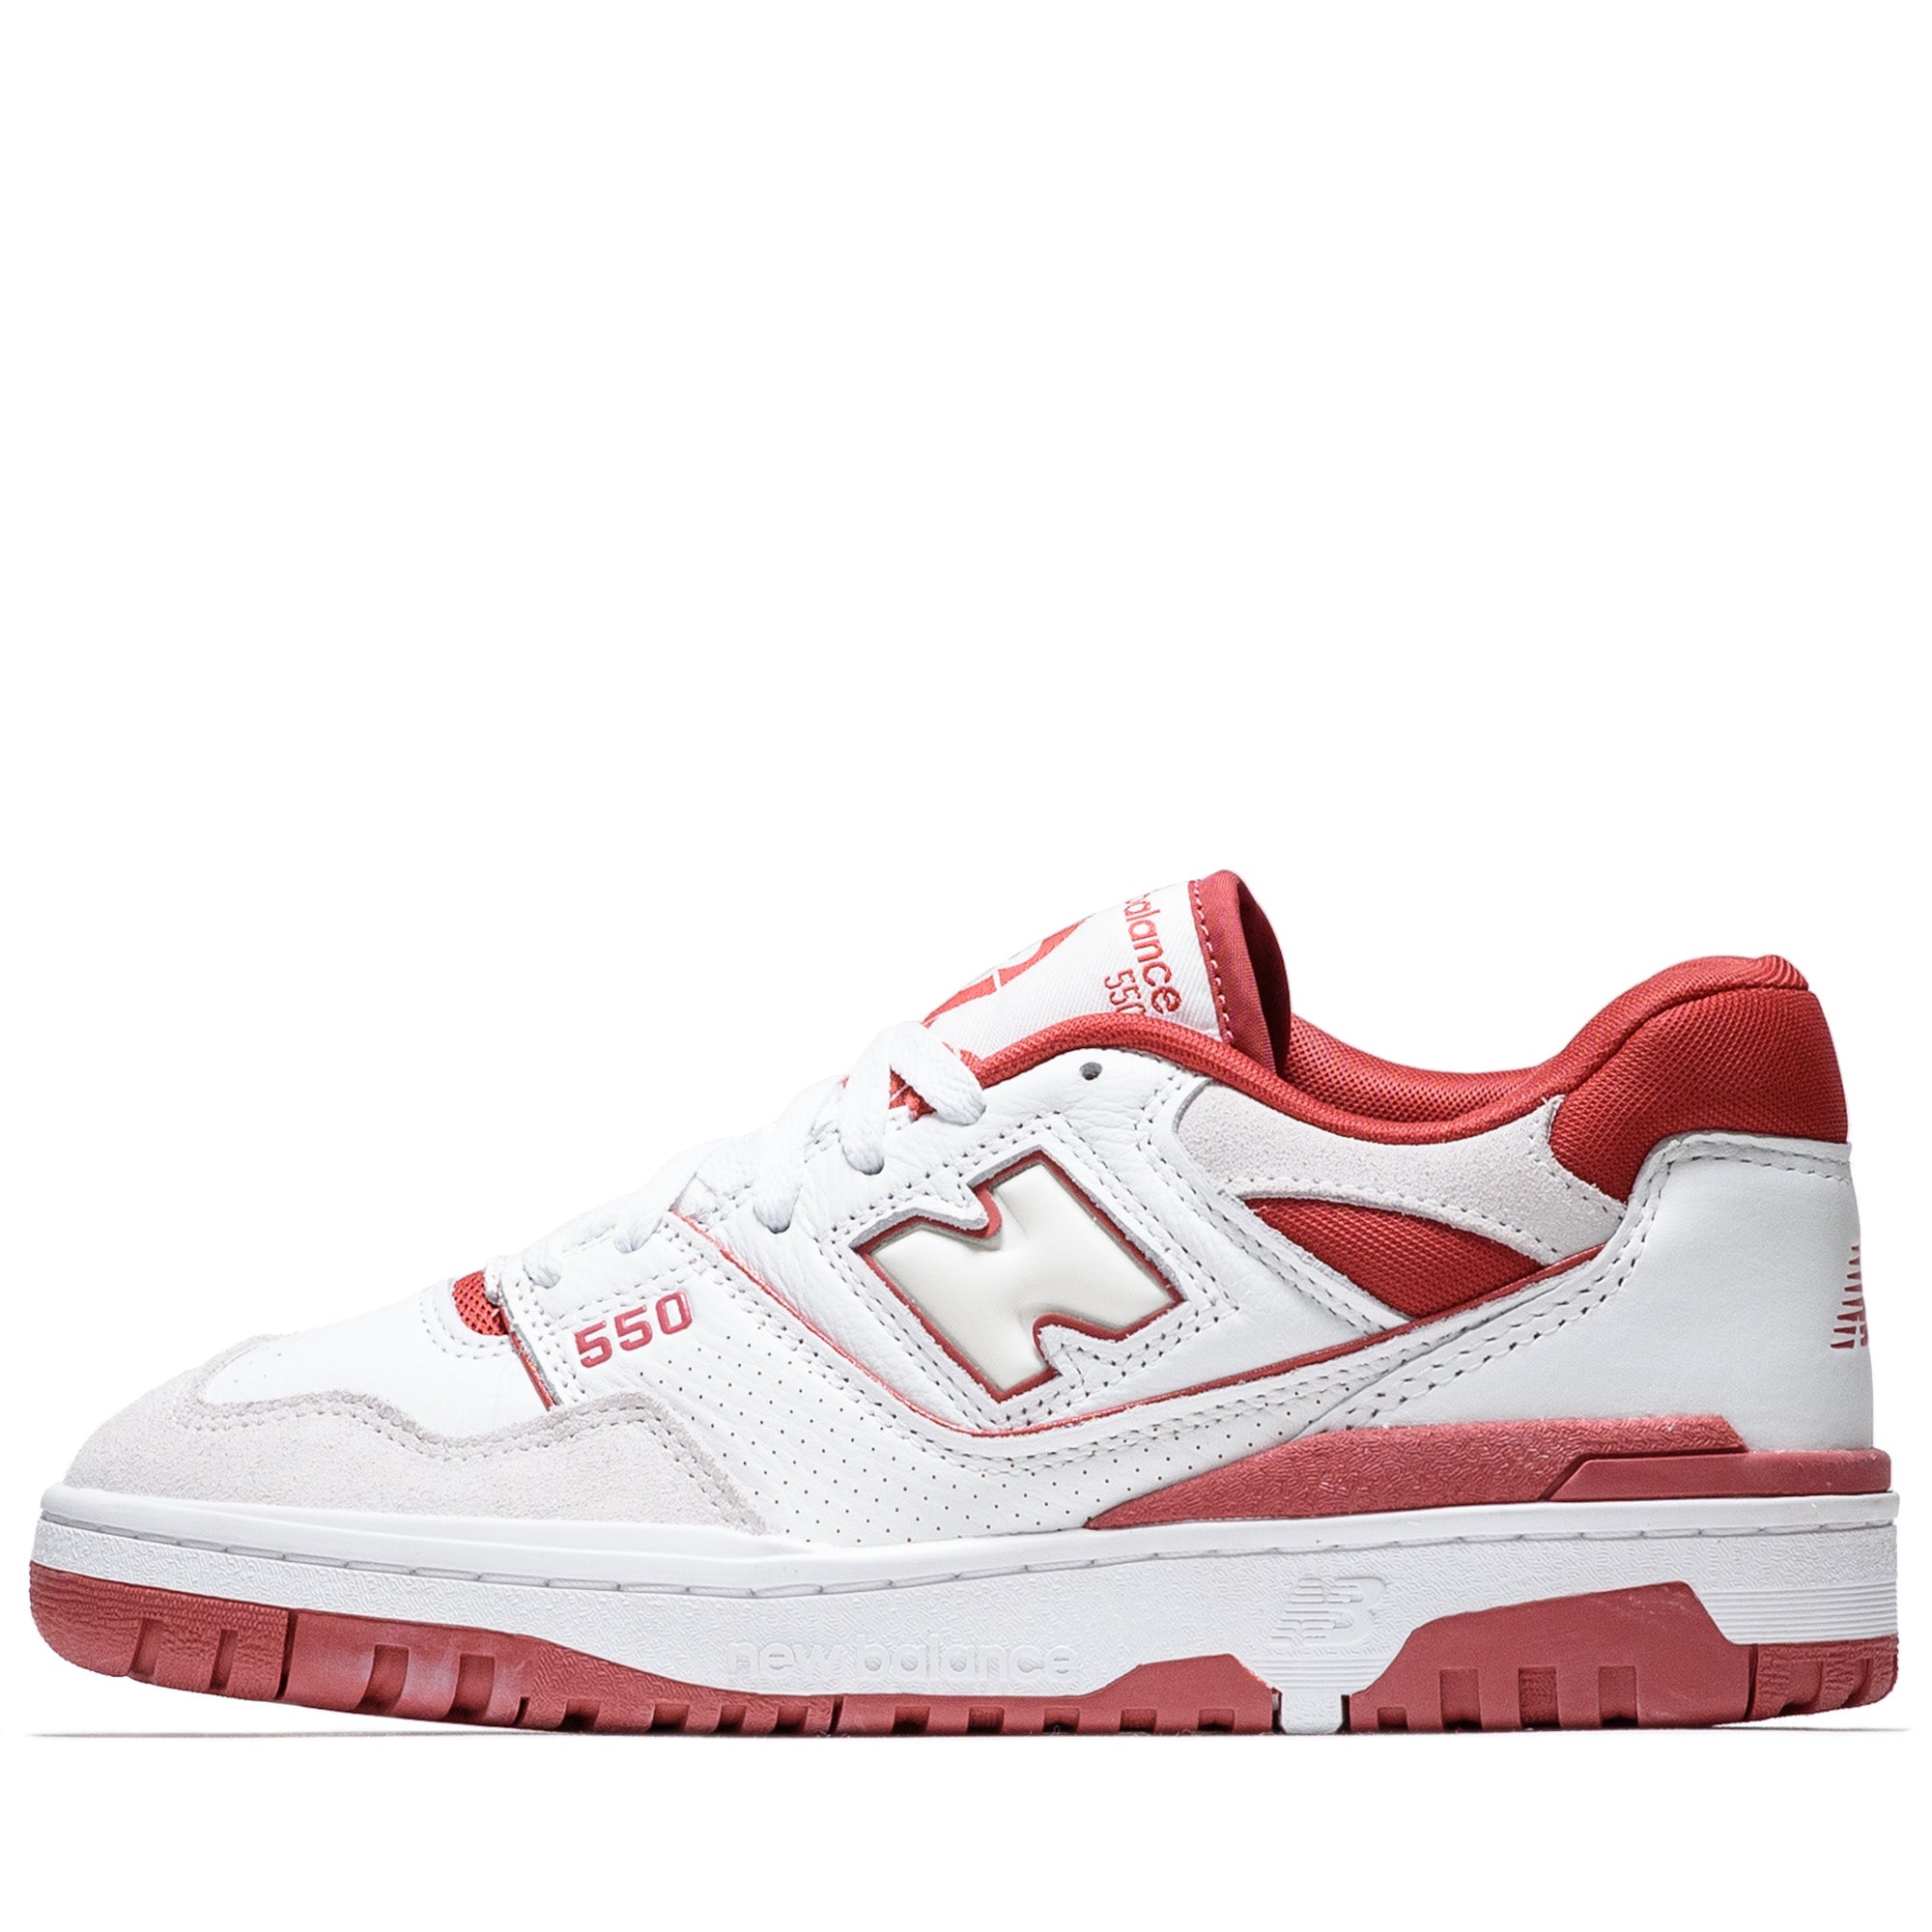 New Balance 550 - White/Red, Size 9.5 by Sneaker Politics